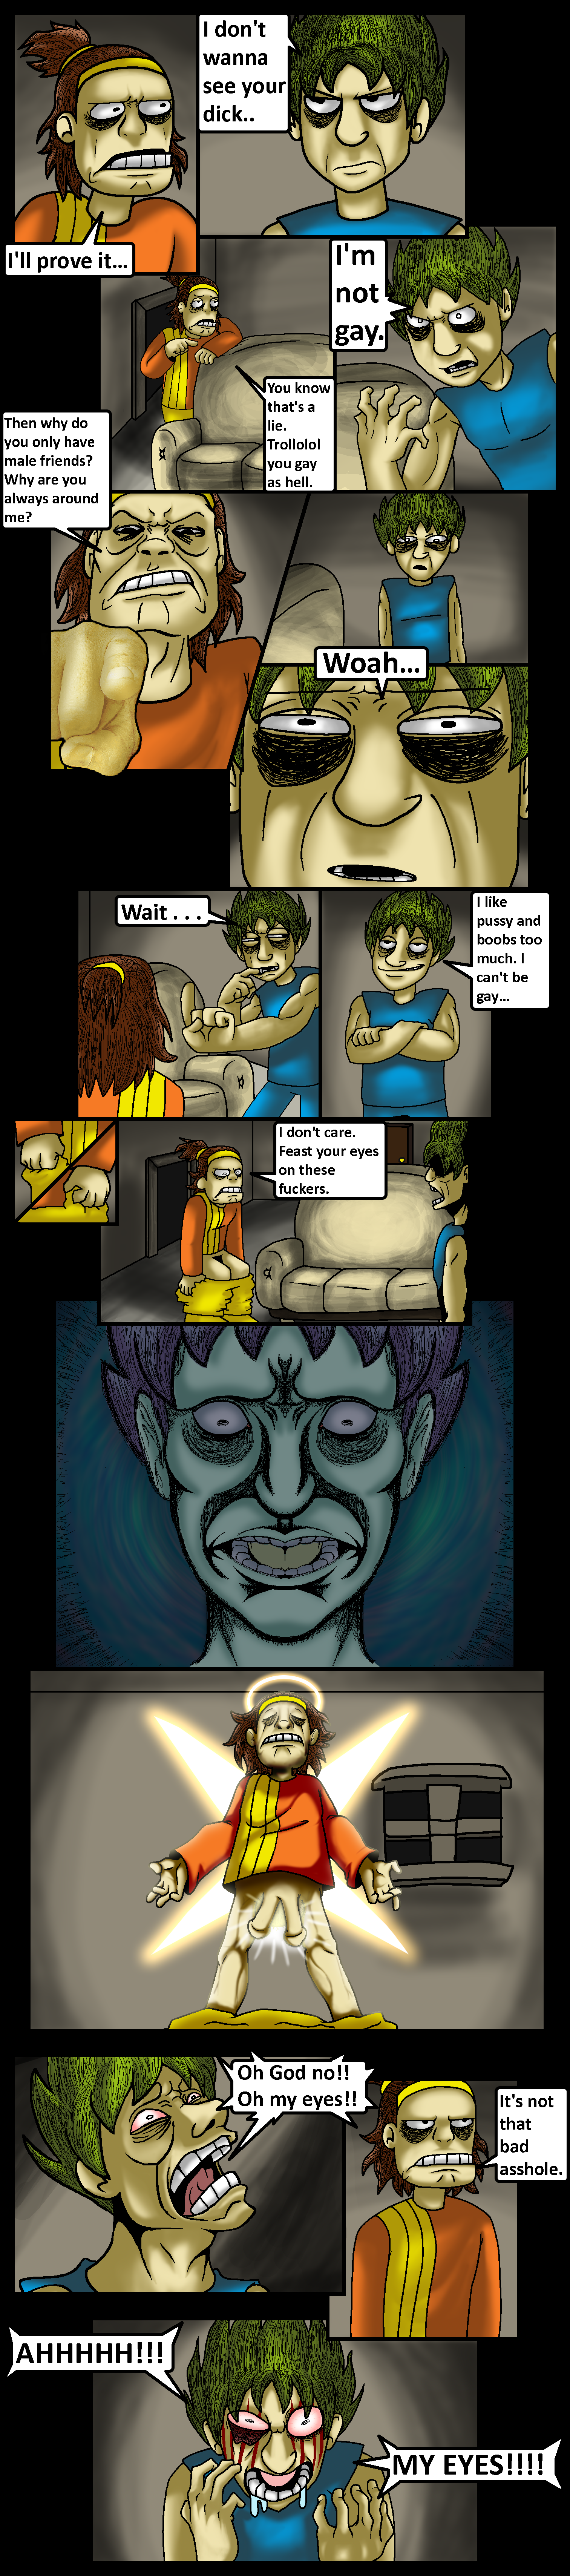 underbite/pg25.png. If you're seeing this, enable images. Or, perhaps we have a website issue. Try refreshing, if unsuccessful email commodorian@tailsgetstrolled.org with a detailed description of how you got here.